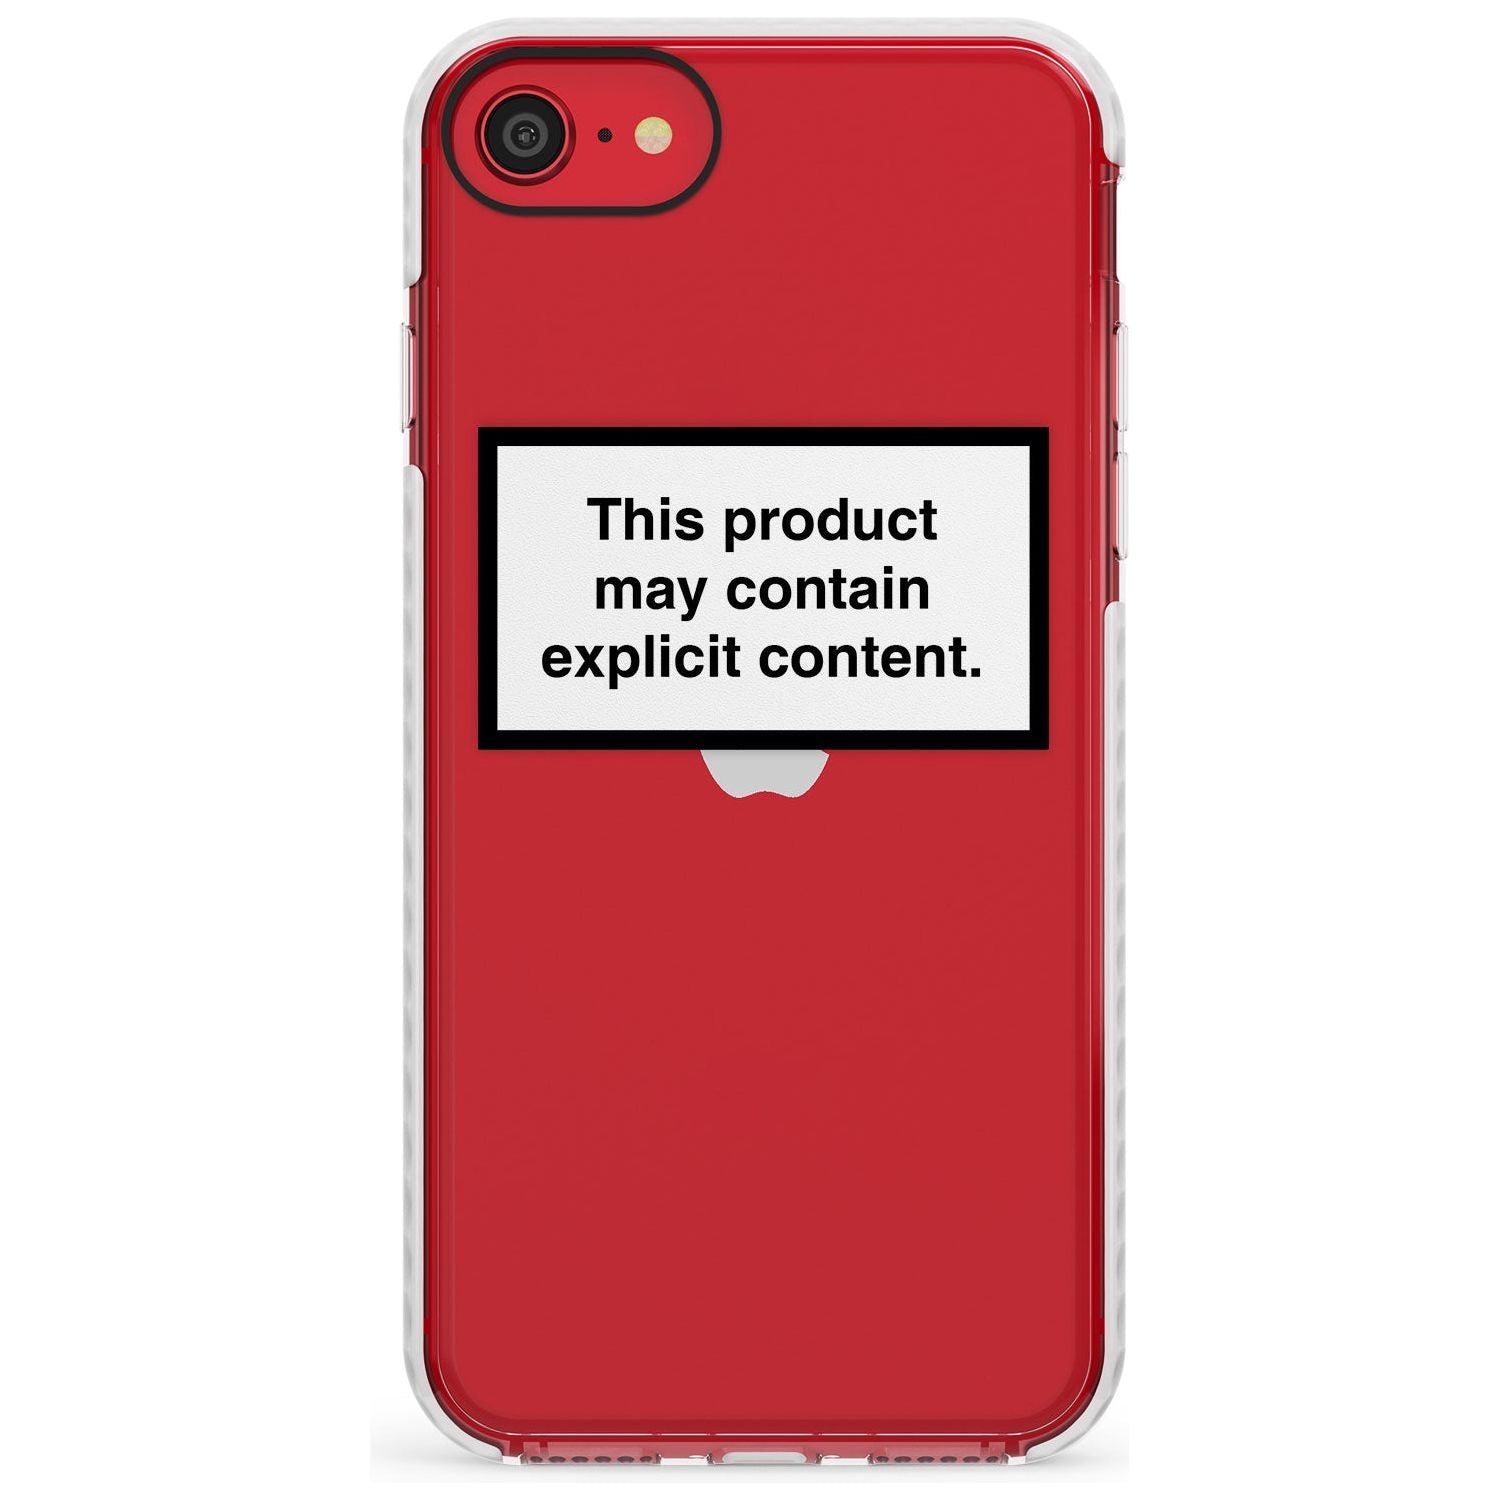 This product may contain explicit content Slim TPU Phone Case for iPhone SE 8 7 Plus